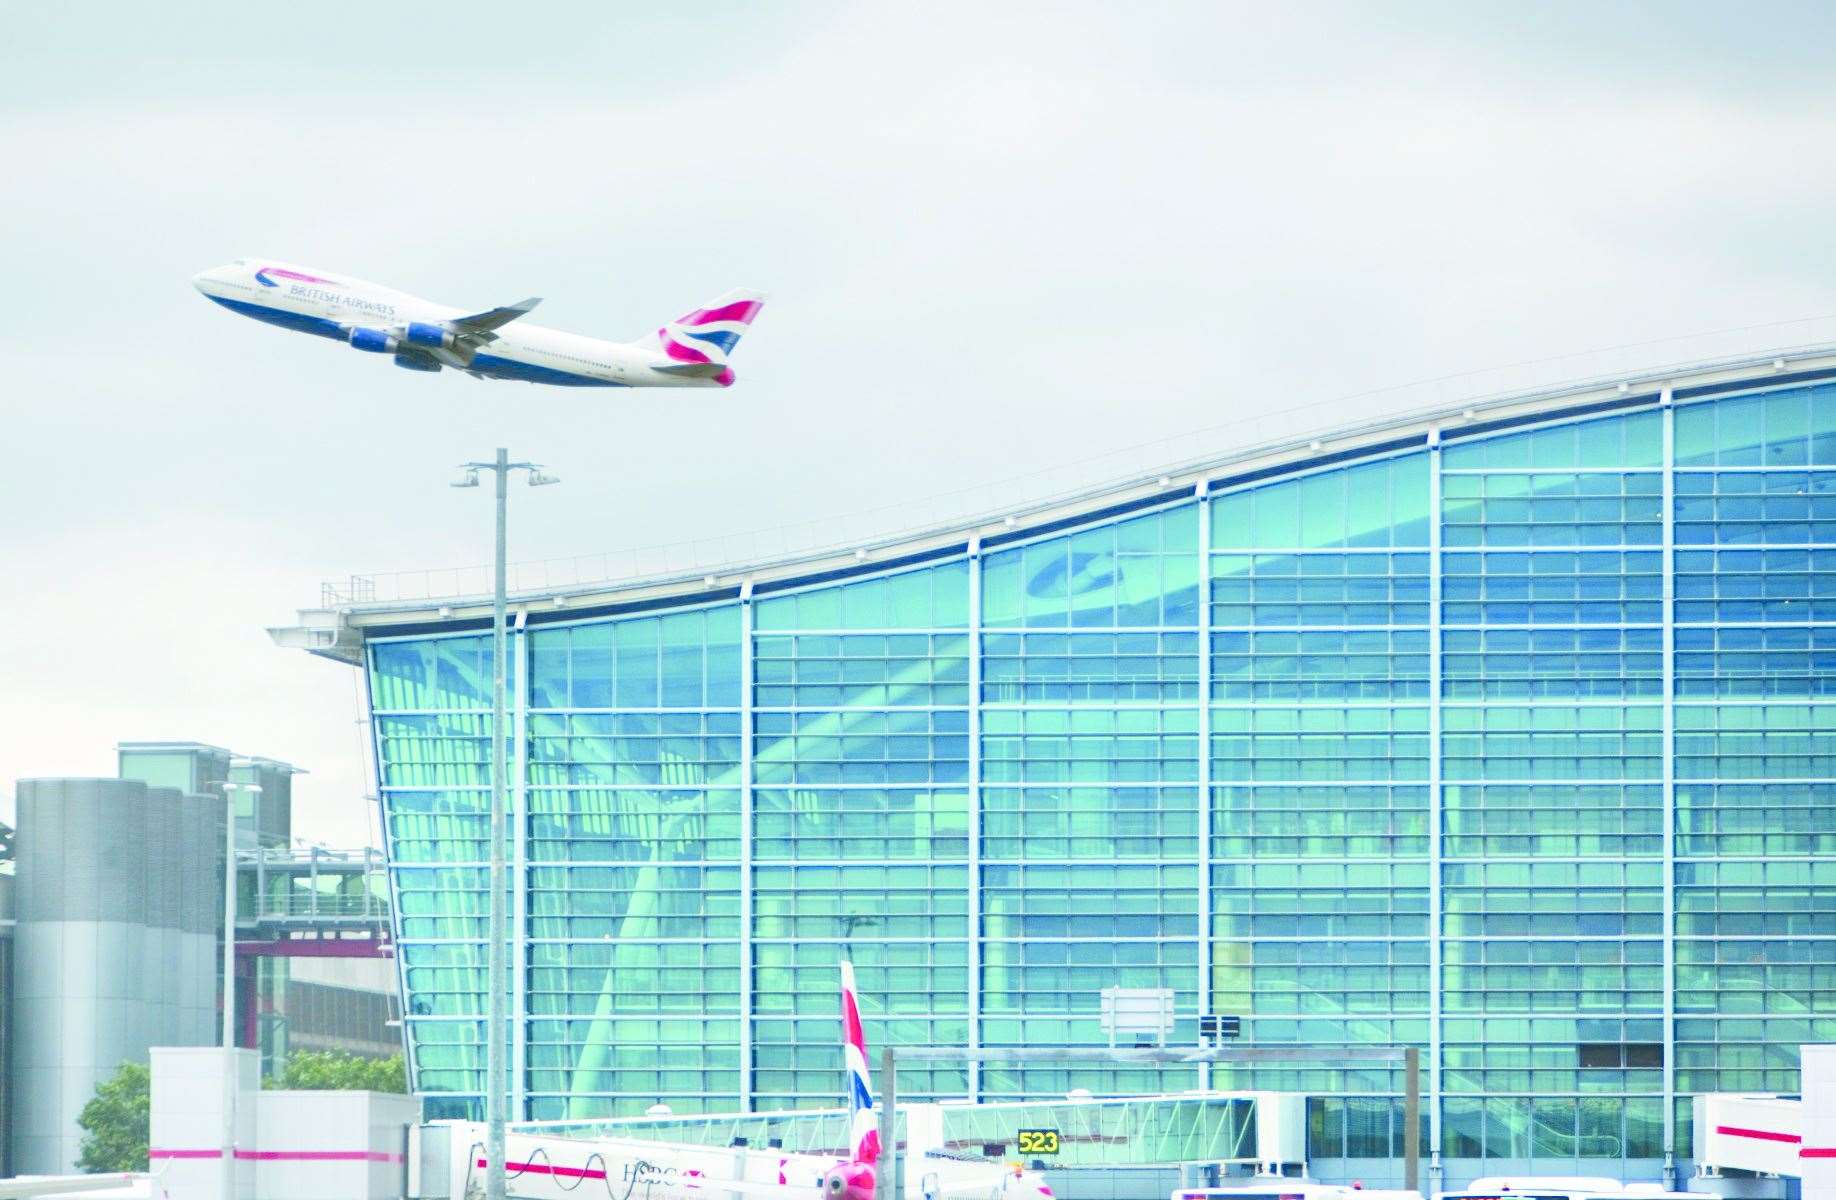 Heathrow Airport, Terminal 5A (main terminal building - southern elevation), British Airways Boeing 747 taking off in background, August 2010.